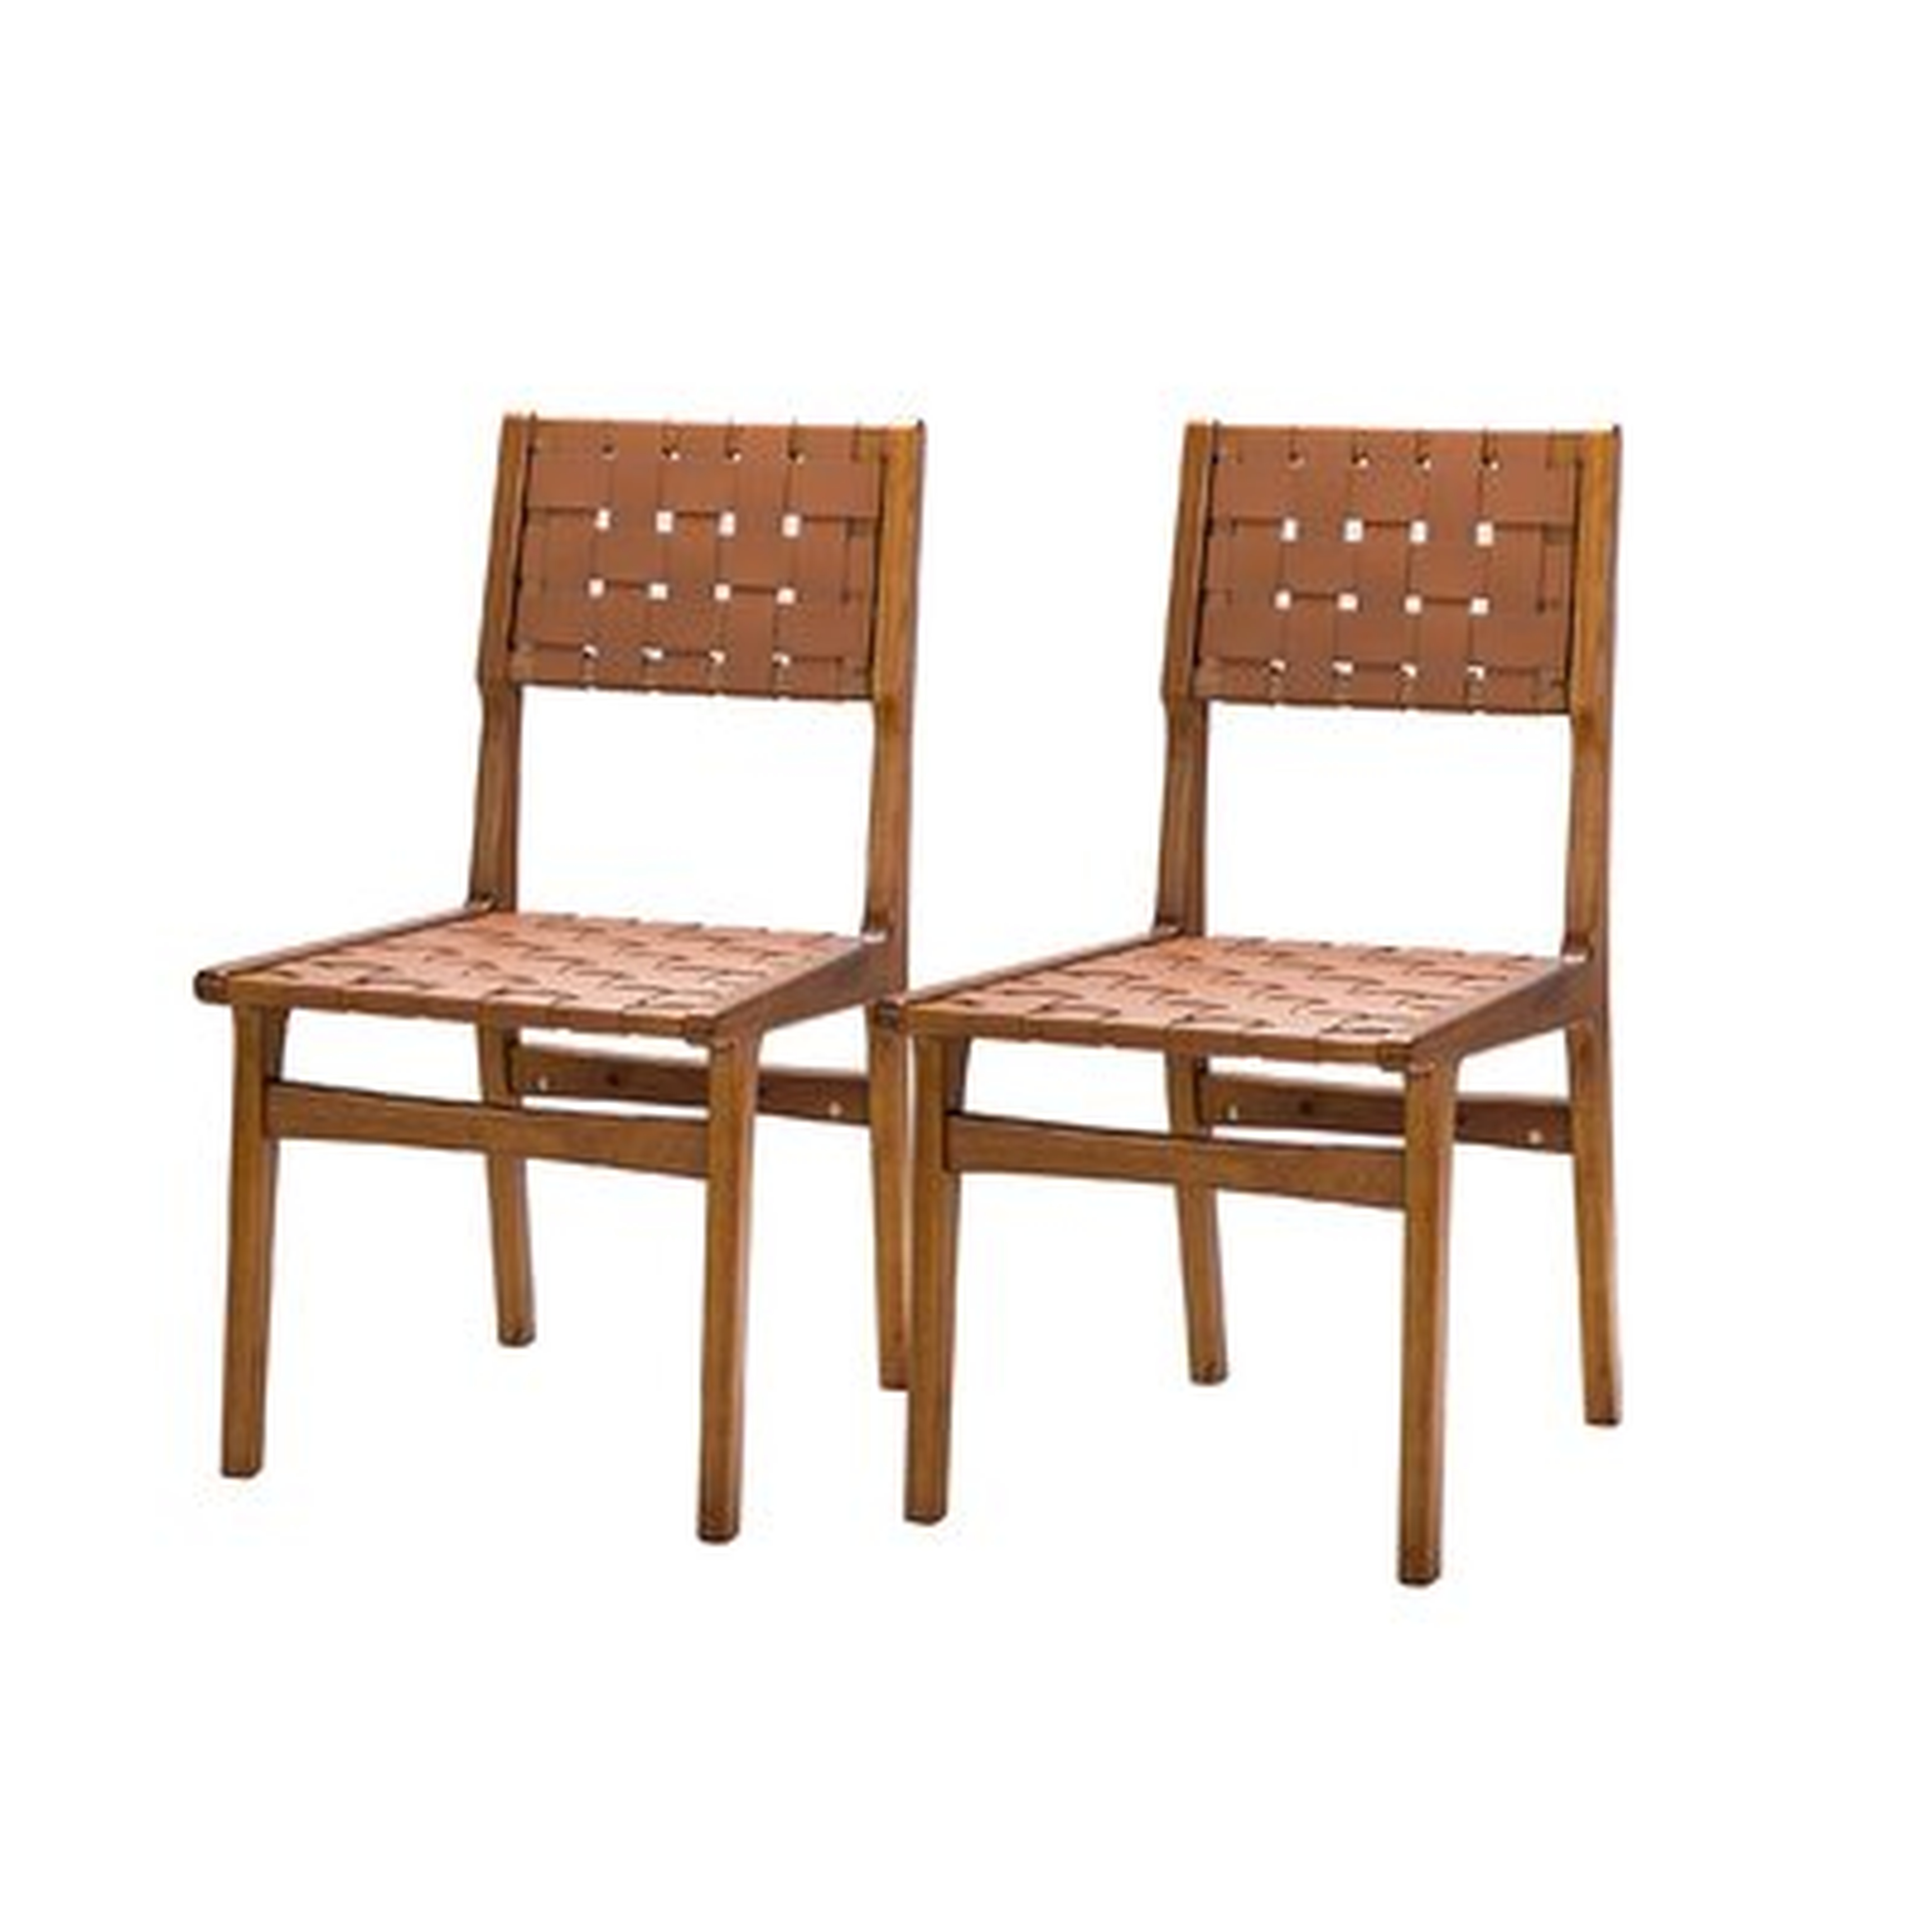 Keyaan Faux Leather Woven Dining Chair With Rubber Wood Legs Set Of 2 - Wayfair